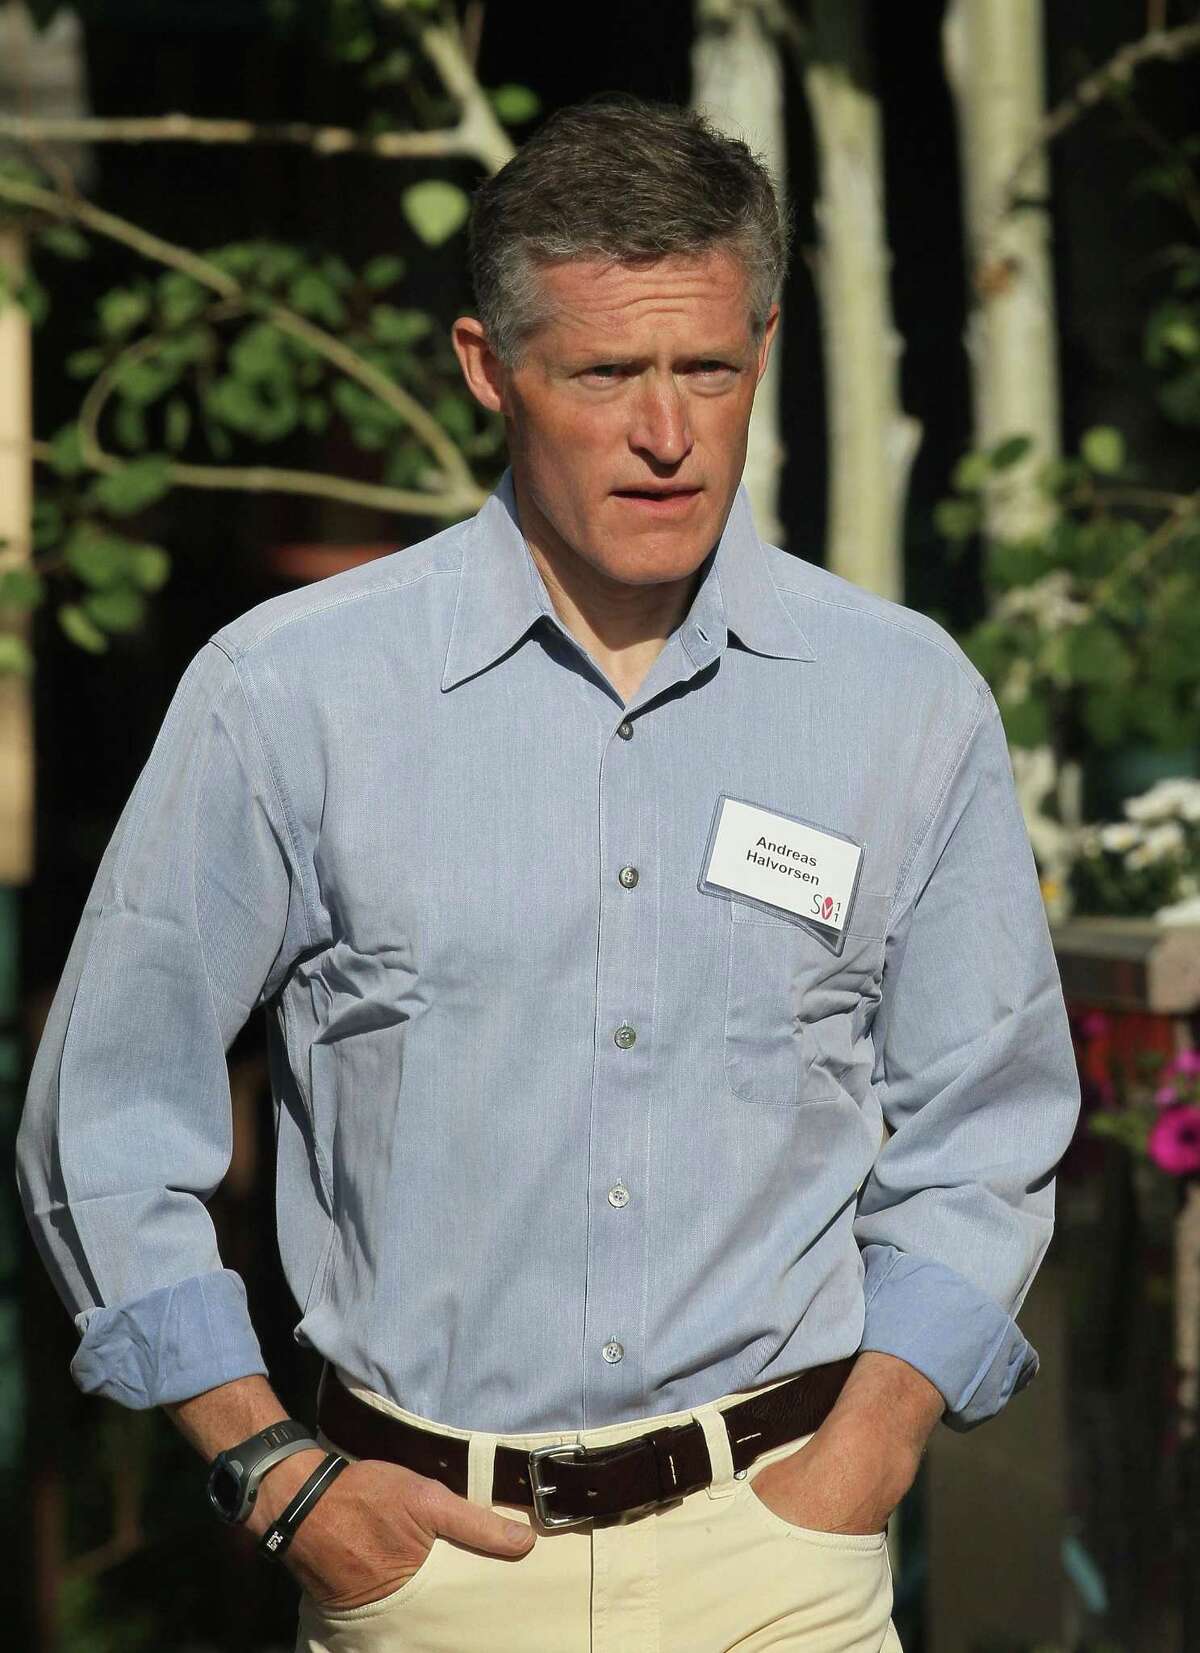 Viking Global Investors founder Andreas Halvorsen in July 2011 in Sun Valley, Idaho. (Photo by Scott Olson/Getty Images)